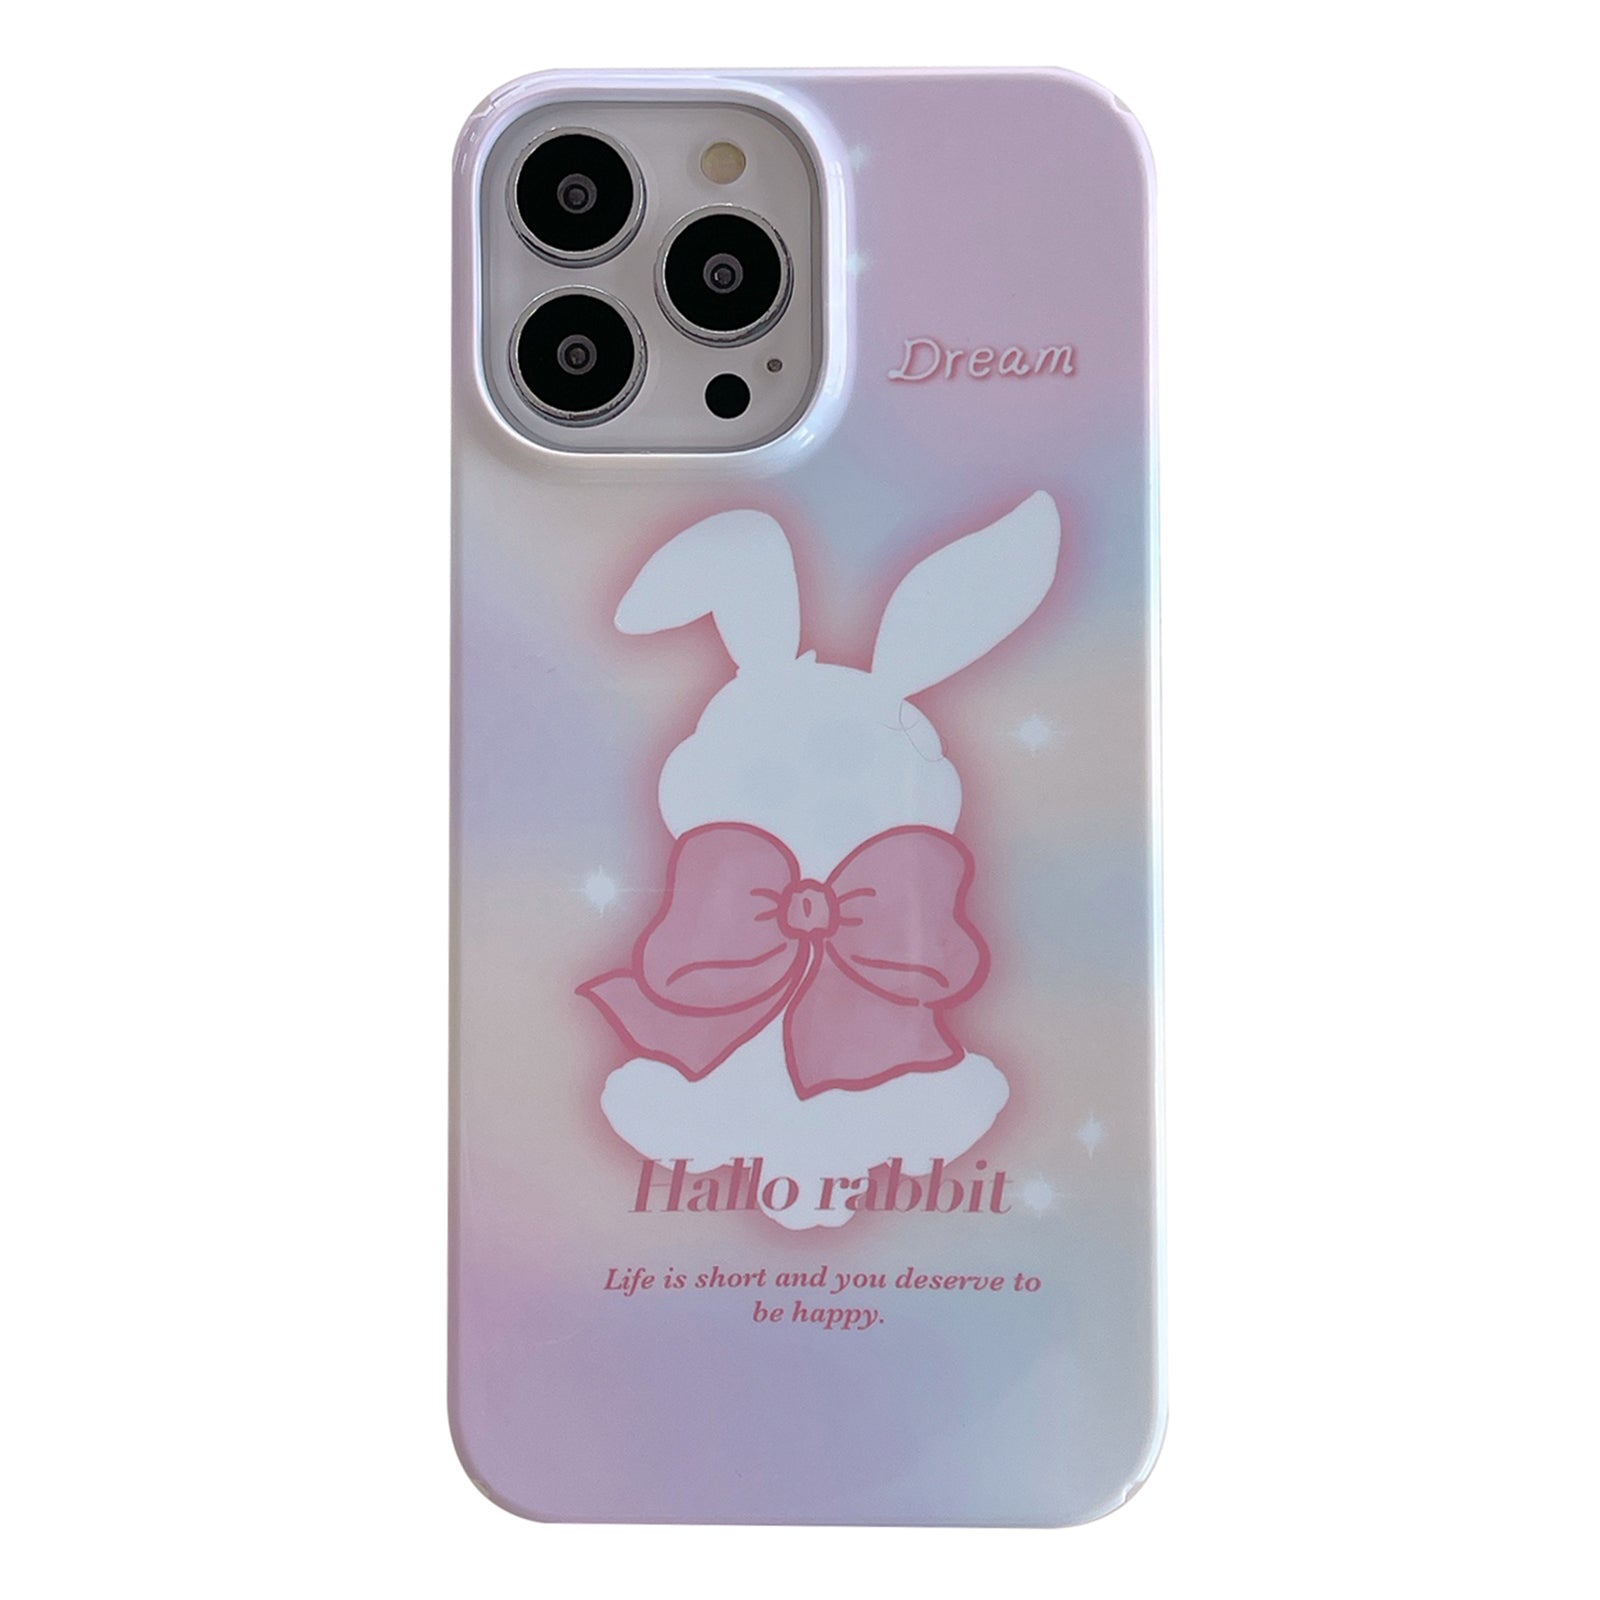 Uniqkart for iPhone 12 Pro Max 6.7 inch Hard PC Phone Case Pattern Printing Protective Glossy Phone Shell - Bowknot Rabbit